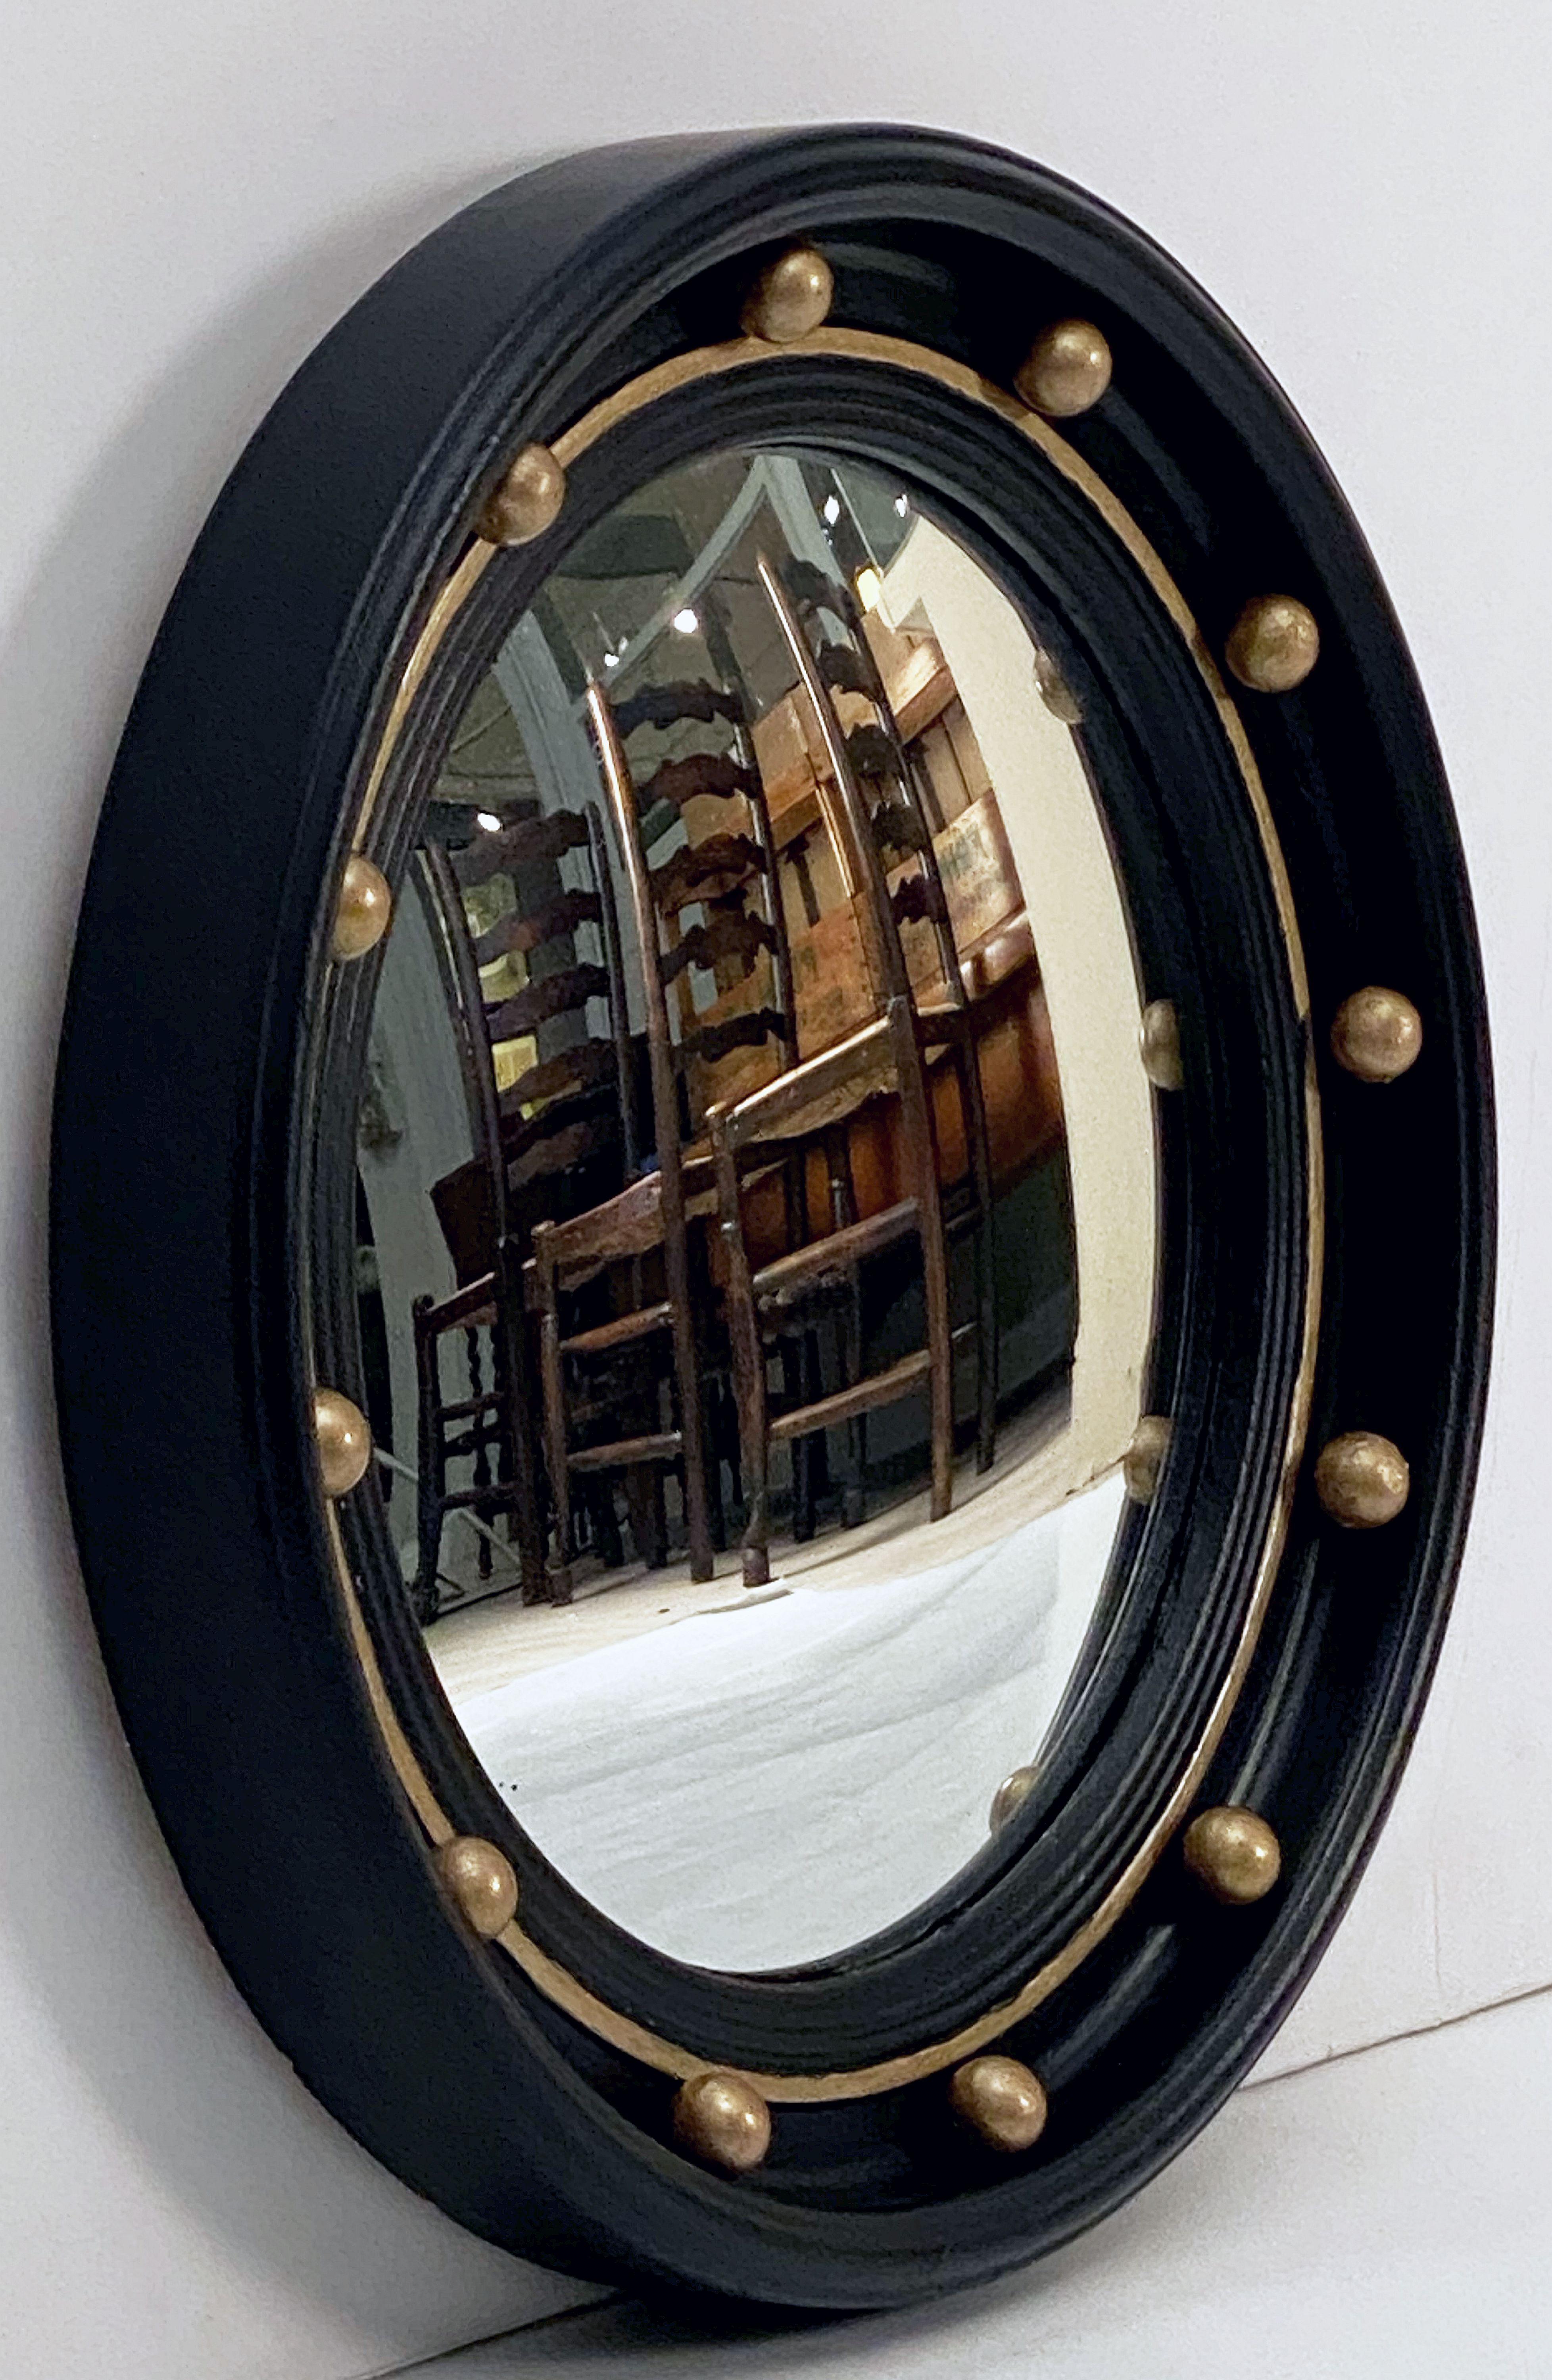 A fine English round or circular convex mirror featuring a Regency design of a molded, ebonized frame with gilt balls and gilt accents around the circumference.

Measures: Diameter is 16 1/4 inches.